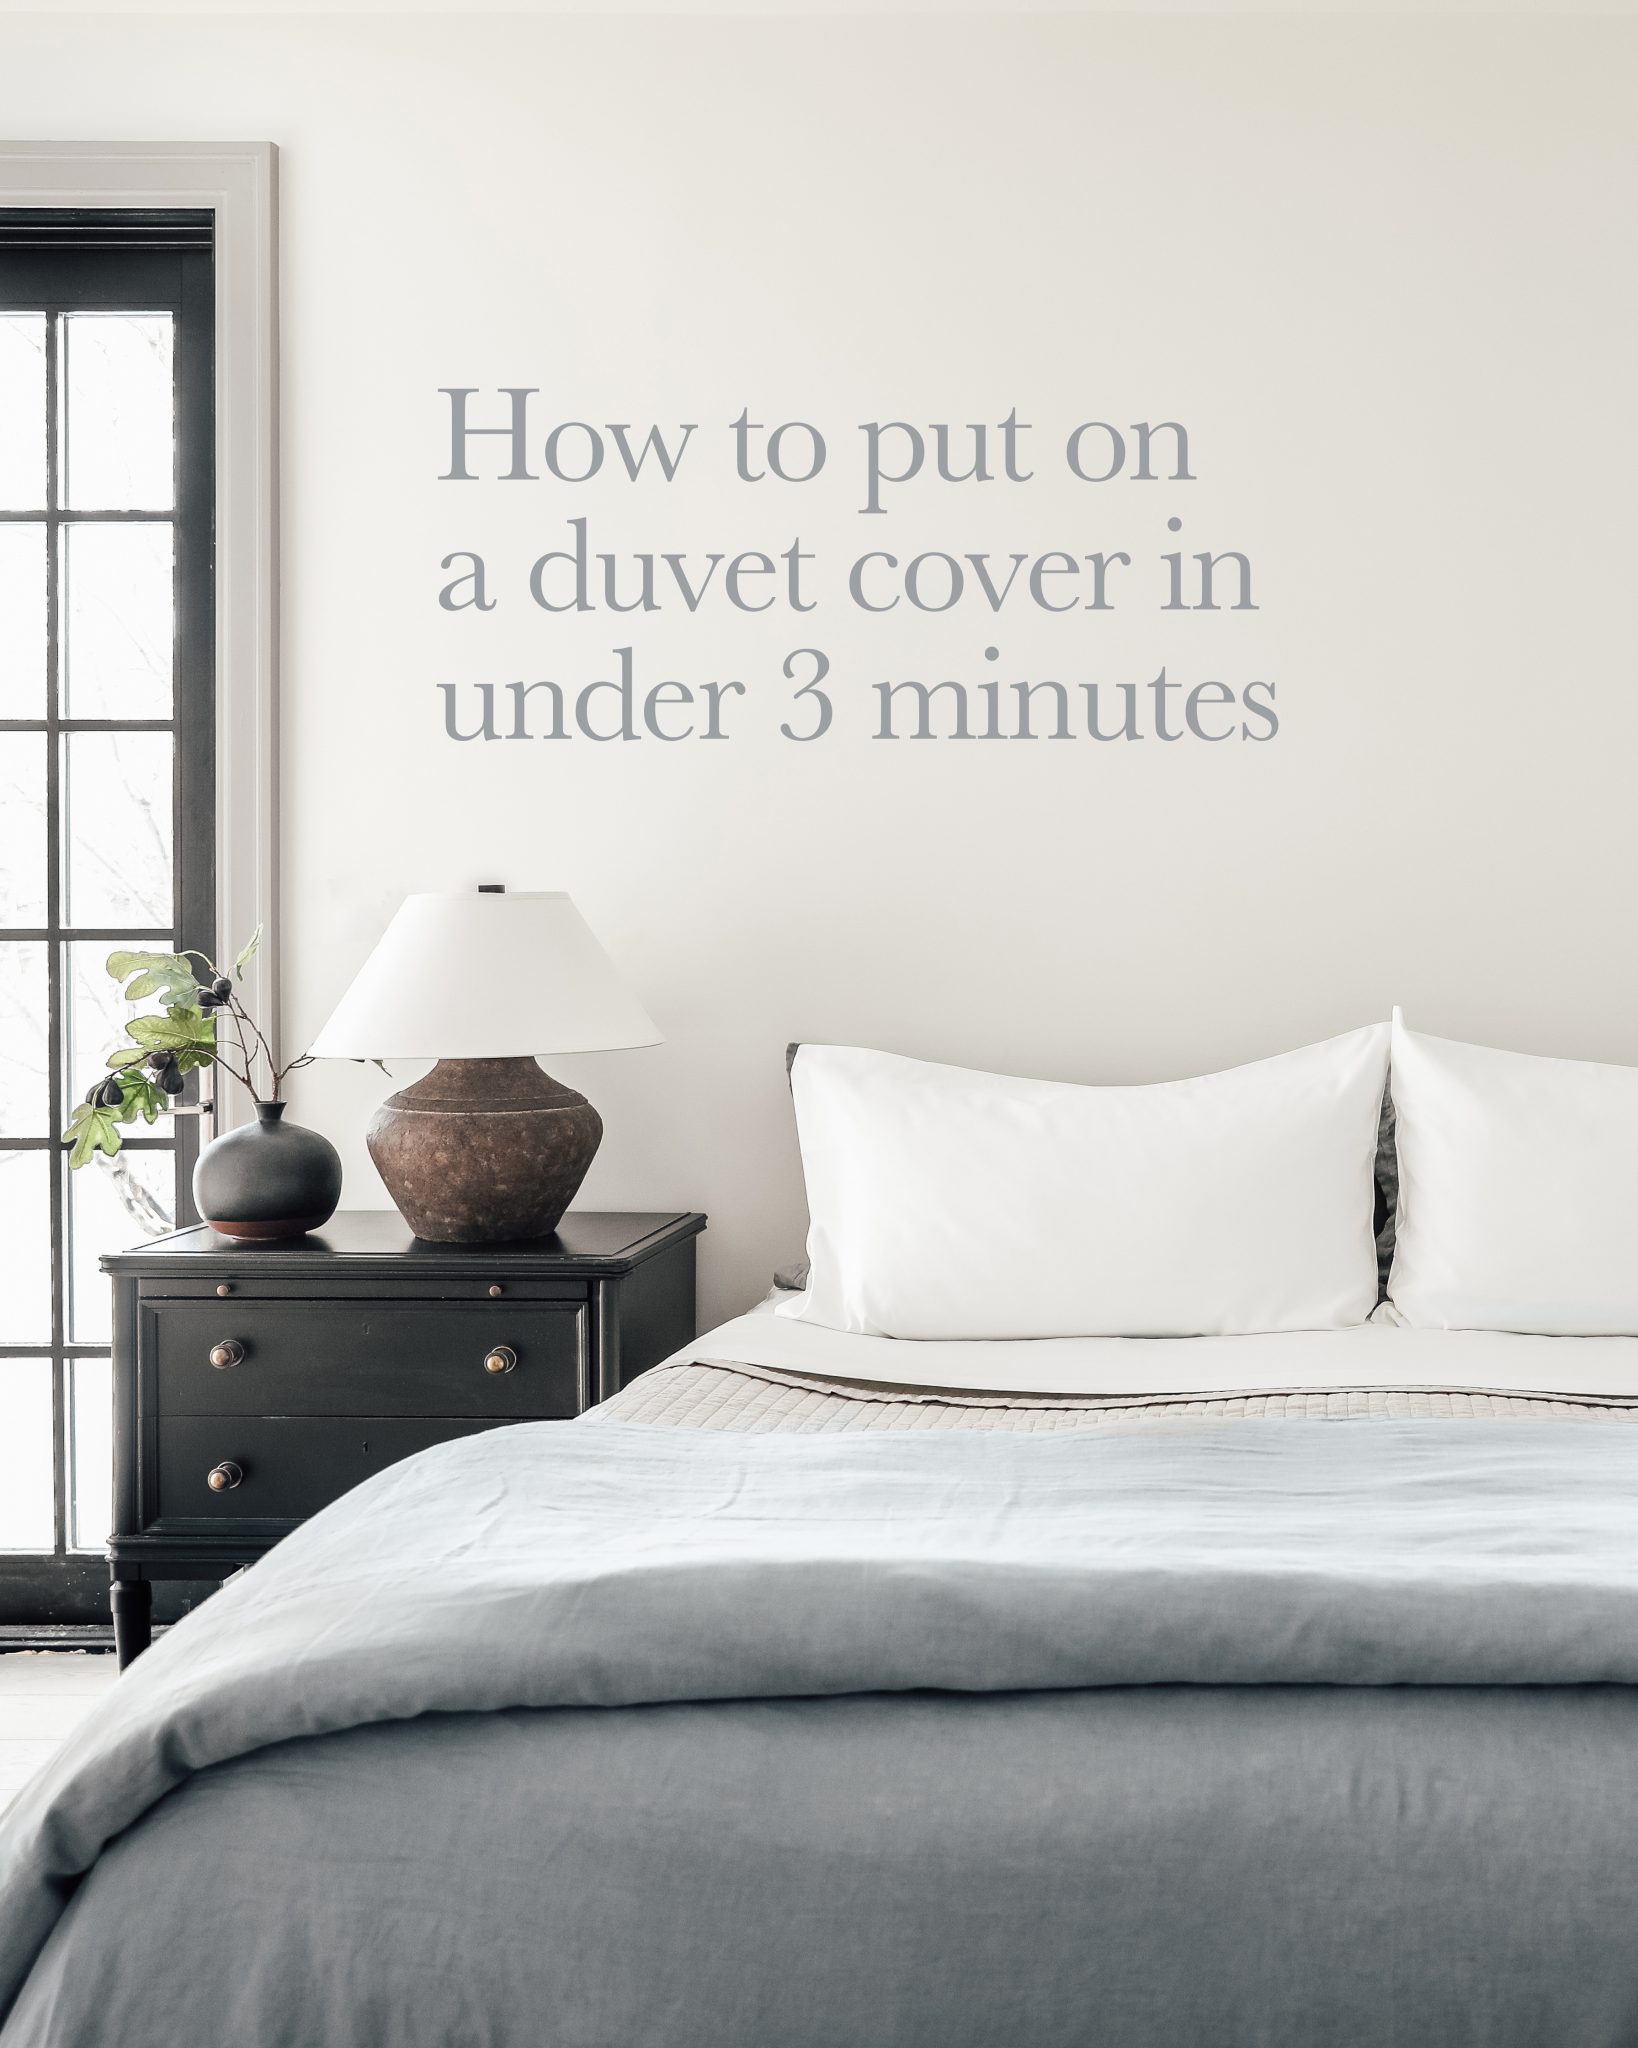 How To Put On A Duvet Cover In Under 3 Minutes Without Crawling